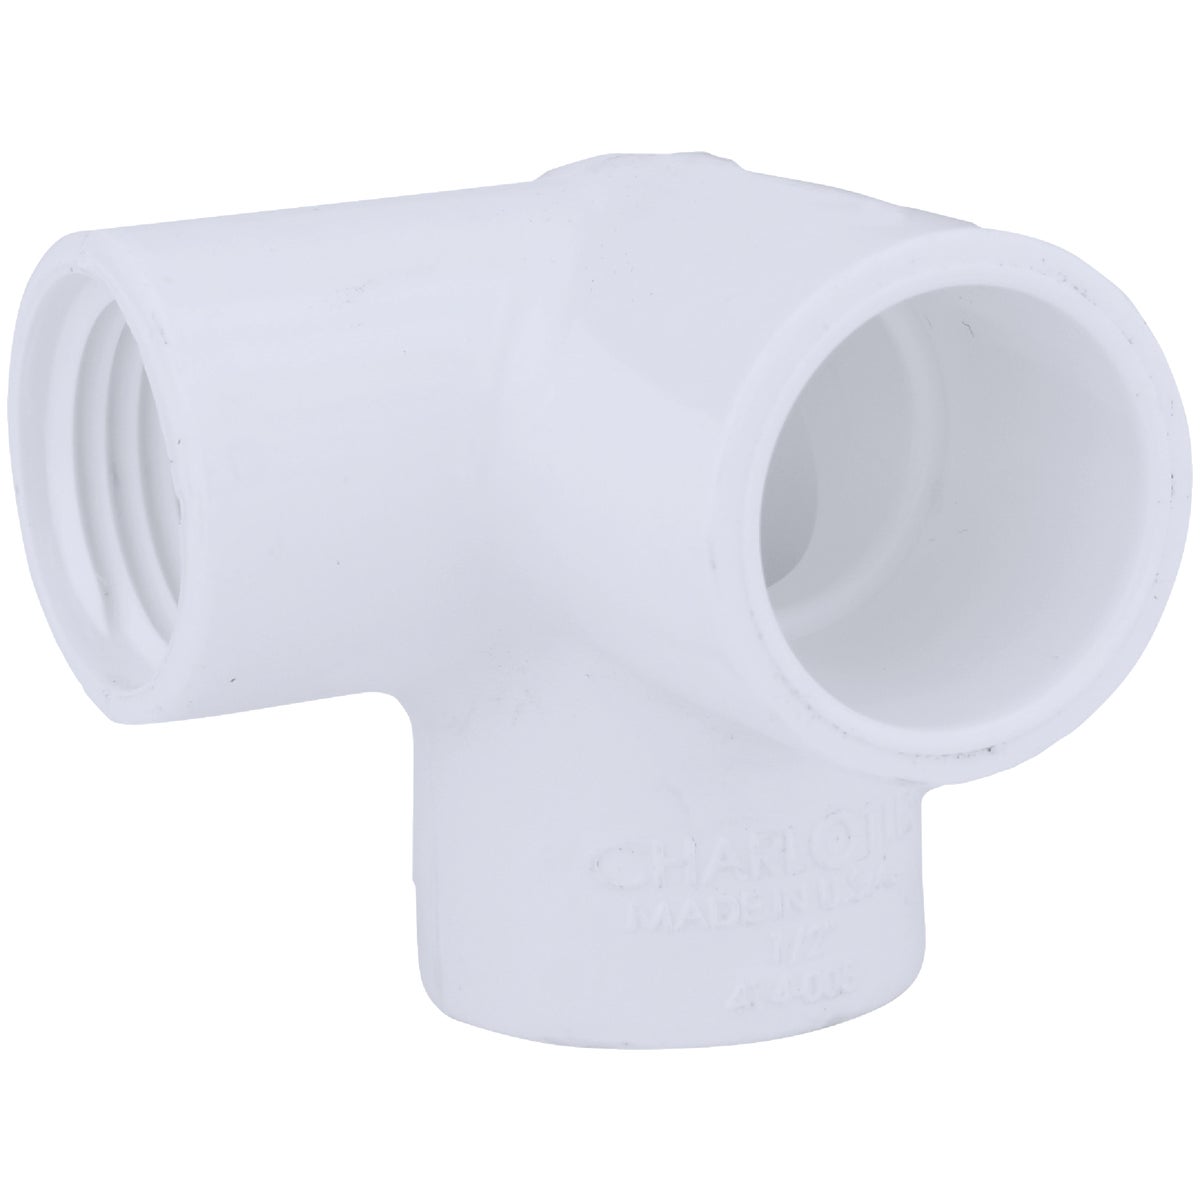 Item 414409, Schedule 40 cold water pressure fitting.